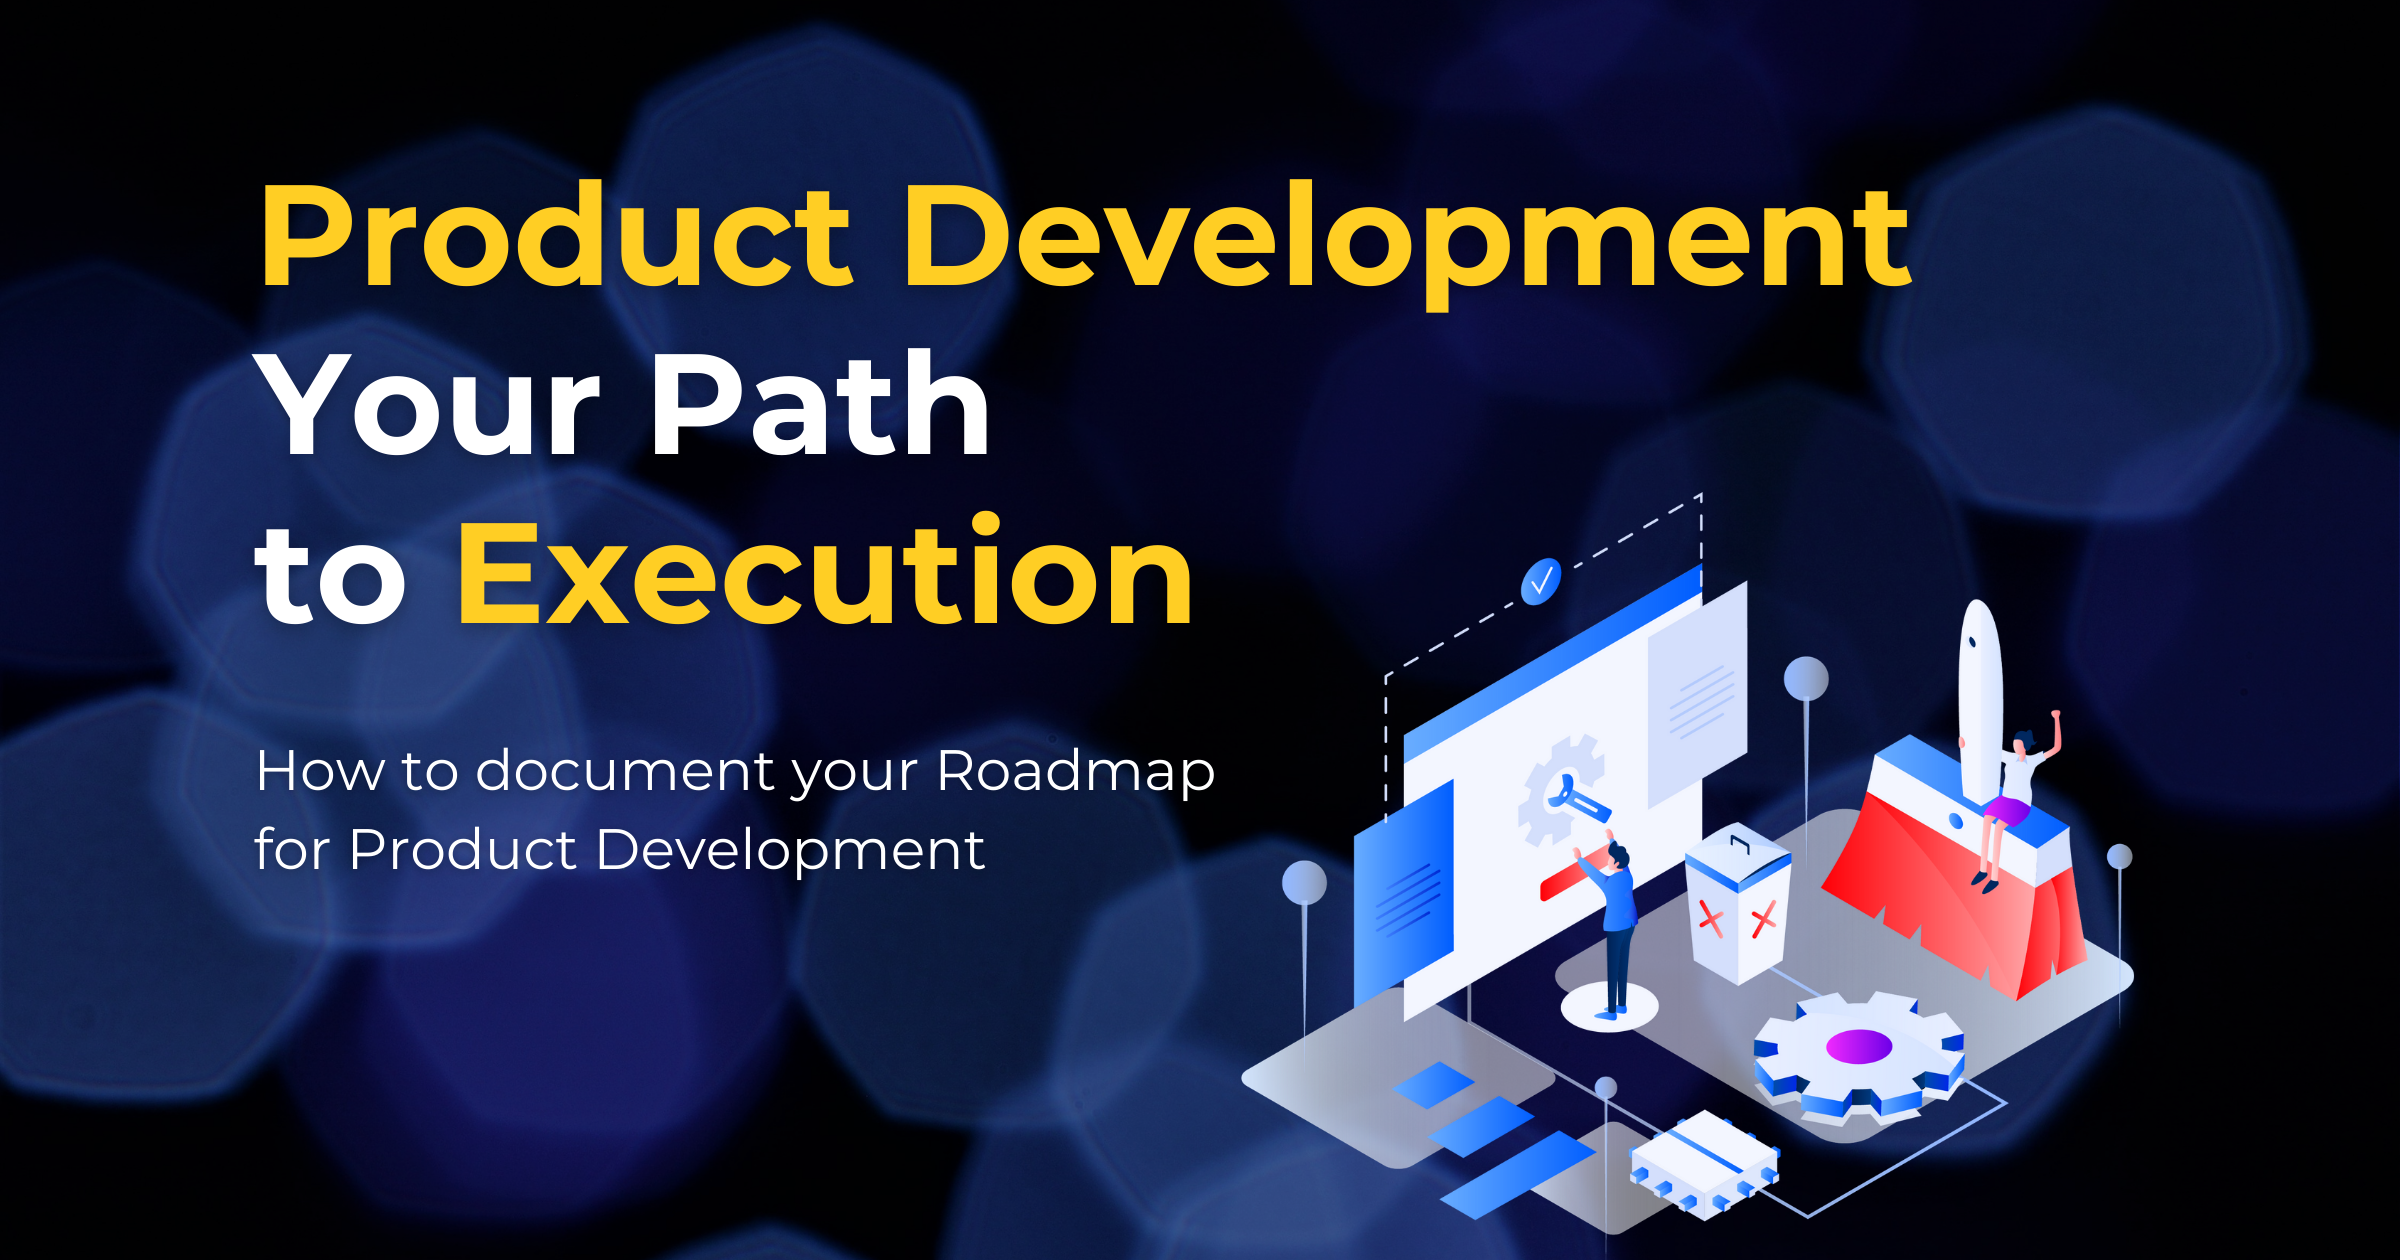 Product Development Roadmap – Everything You Need to Execute